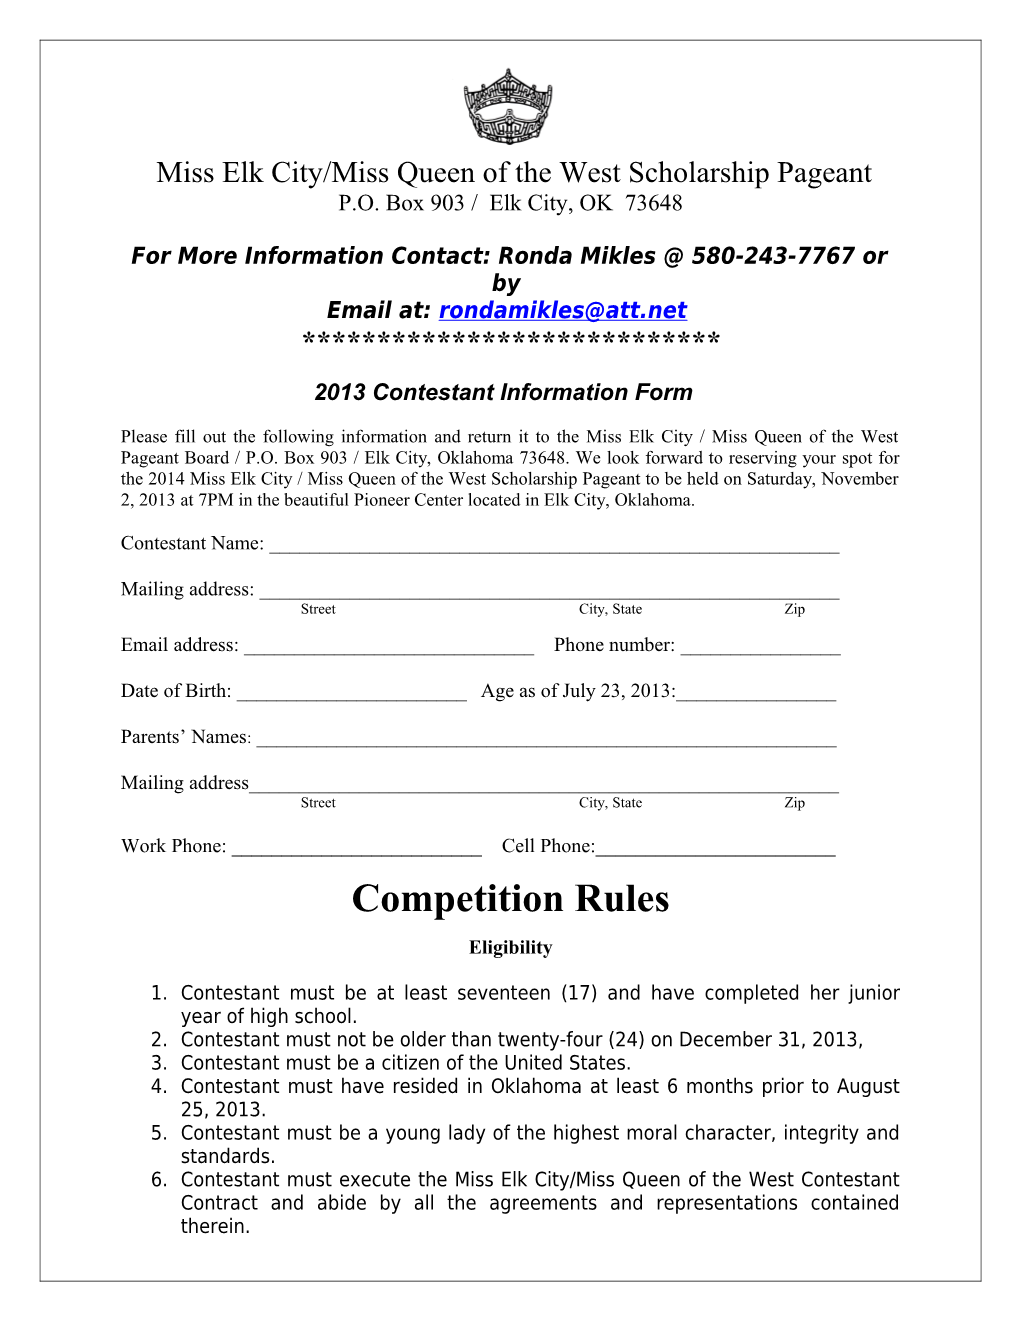 Miss Elk City/Miss Queen of the West Scholarship Pageant